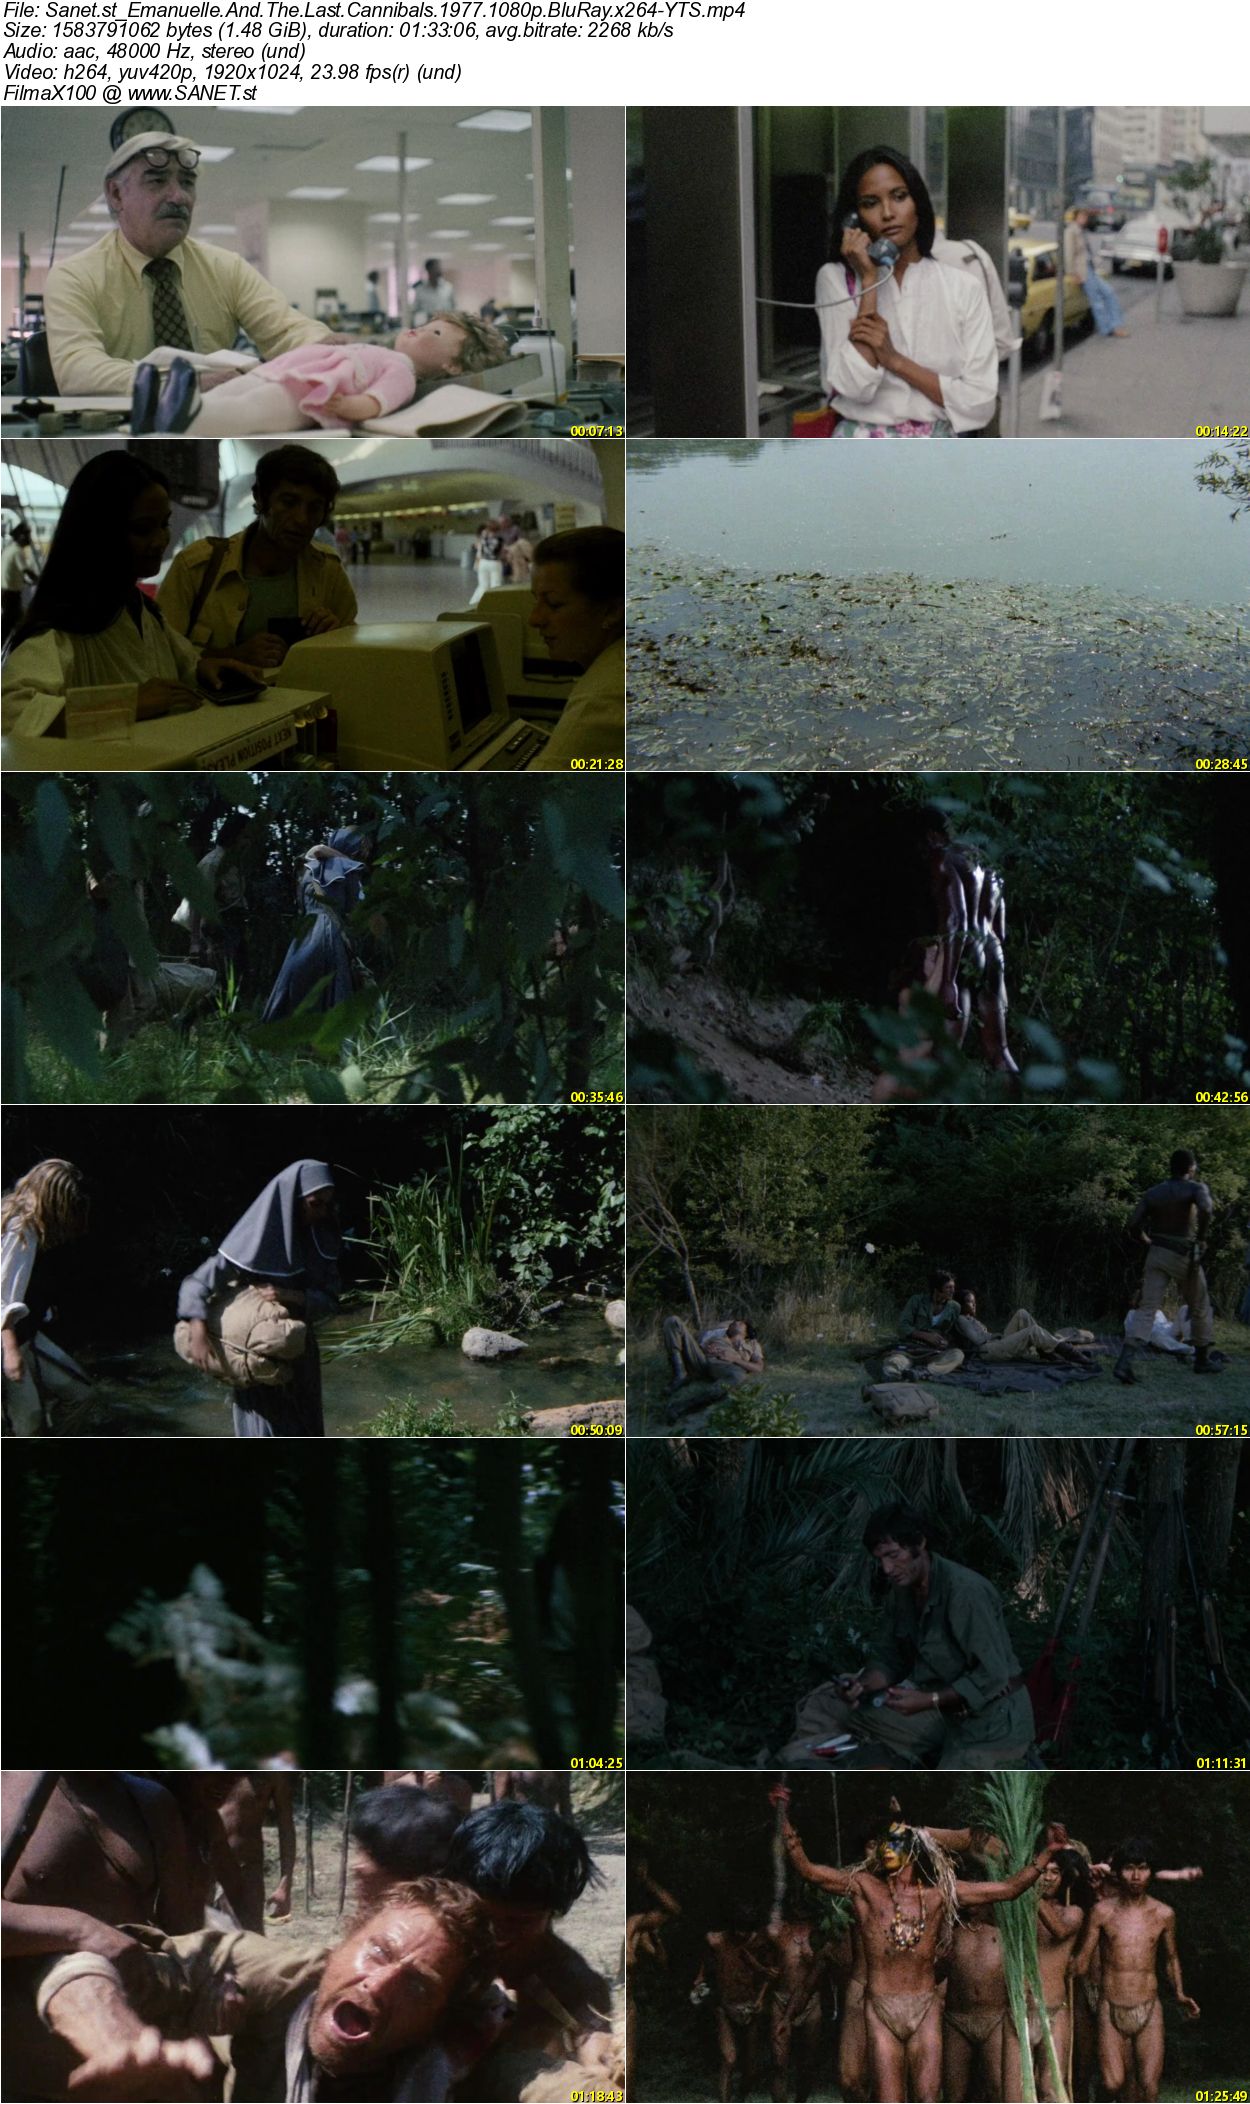 Emanuelle And The Last Cannibals 1977 1080p BluRay x264-YTS.